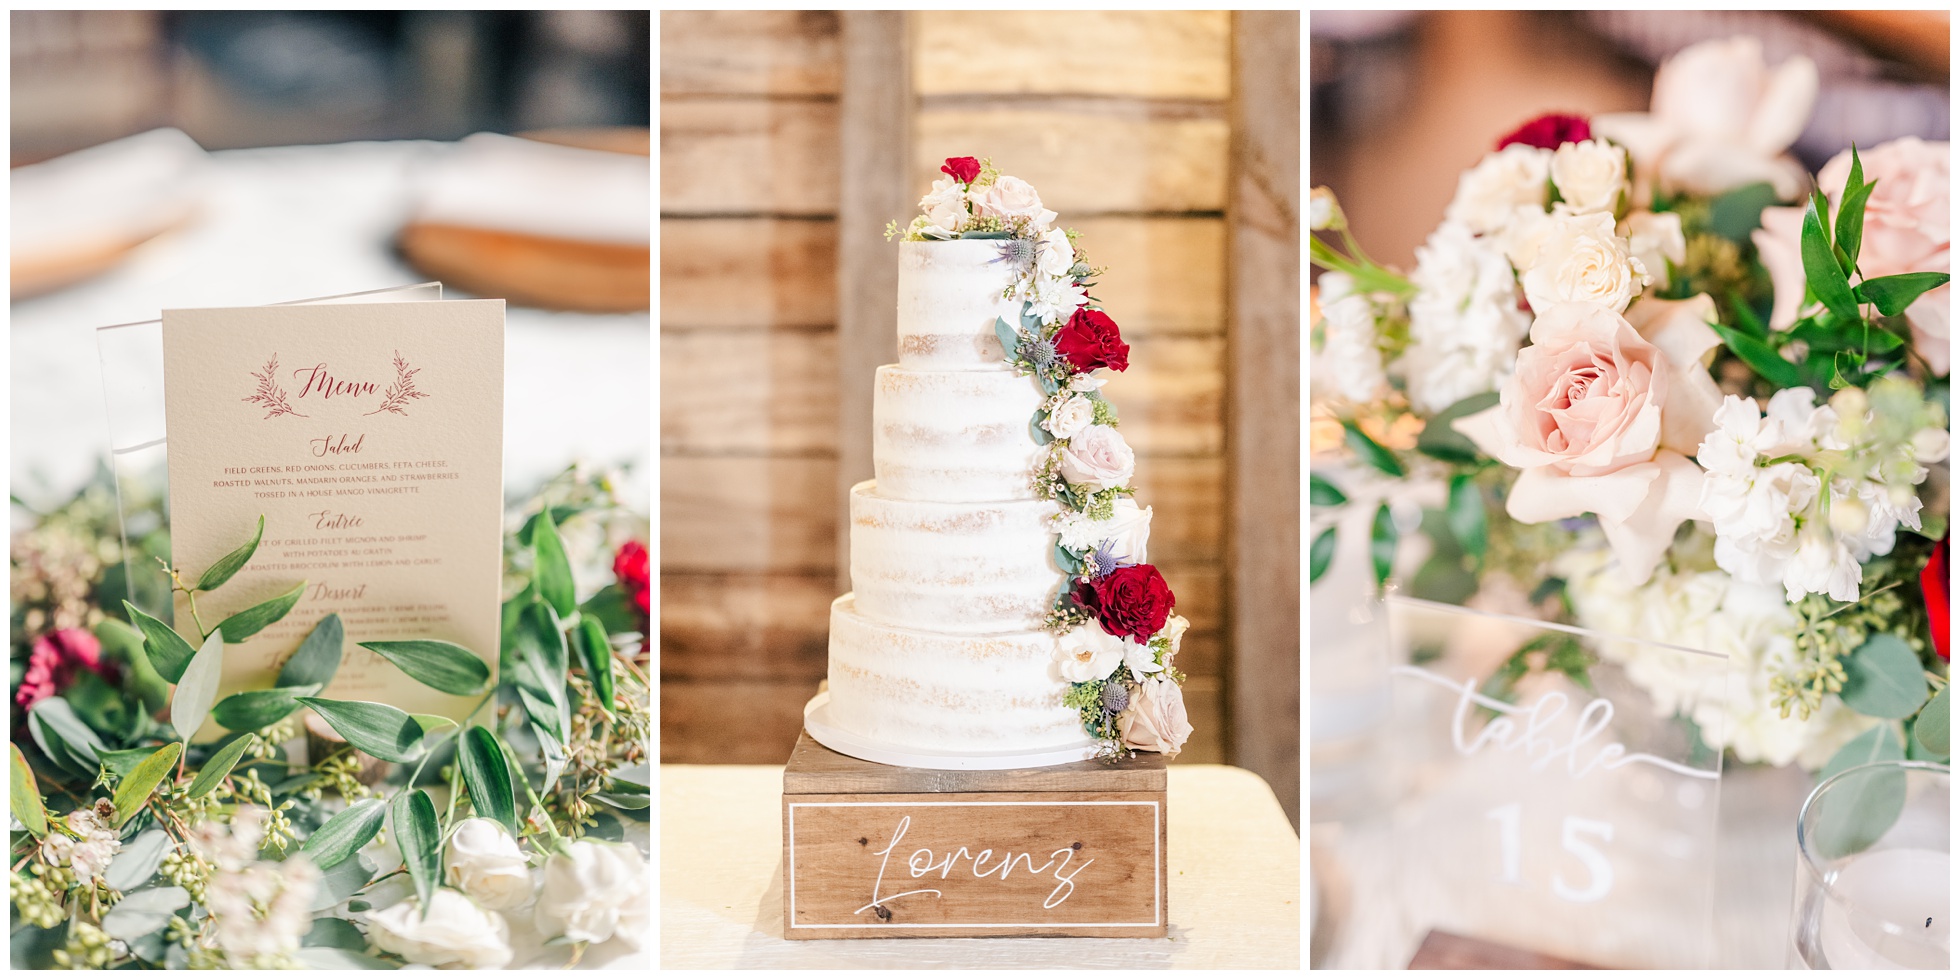 Wedding Reception forals, greenery, and Cake by HEB Blooms Magnolia.